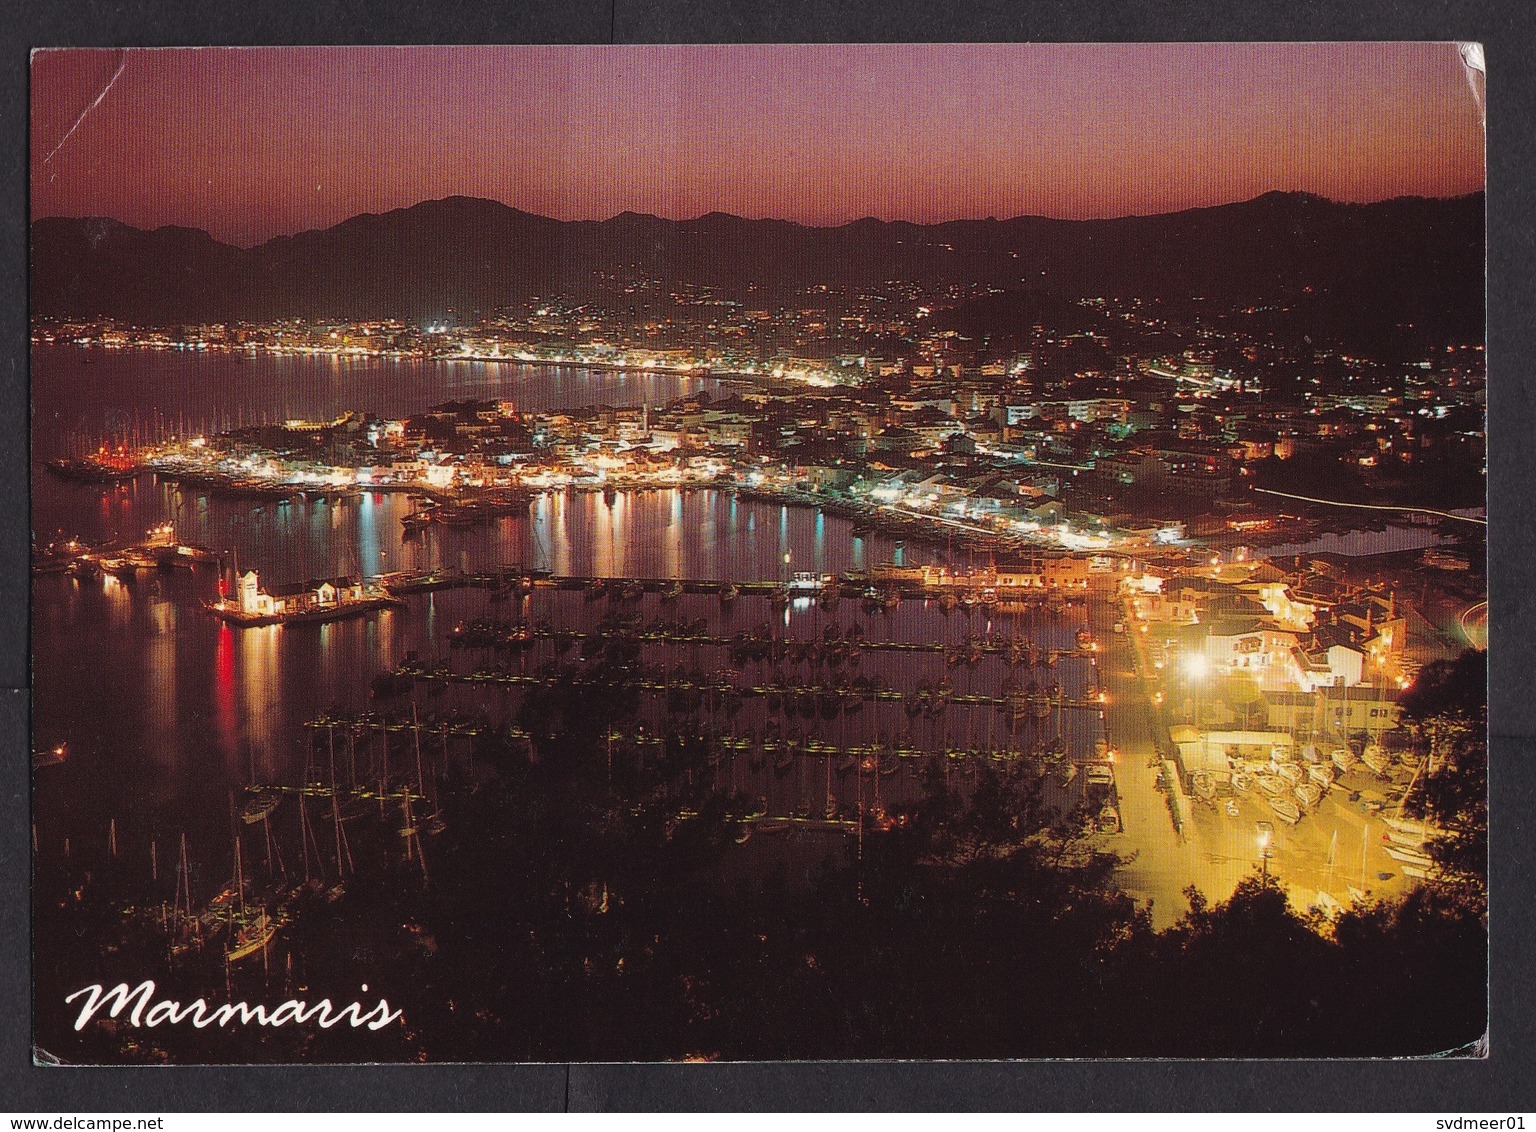 Turkey: Picture Postcard Marmaris To Netherlands, 1990s, 2 Stamps, Bird, City View, Inflation: 225,000.- (minor Damage) - Covers & Documents